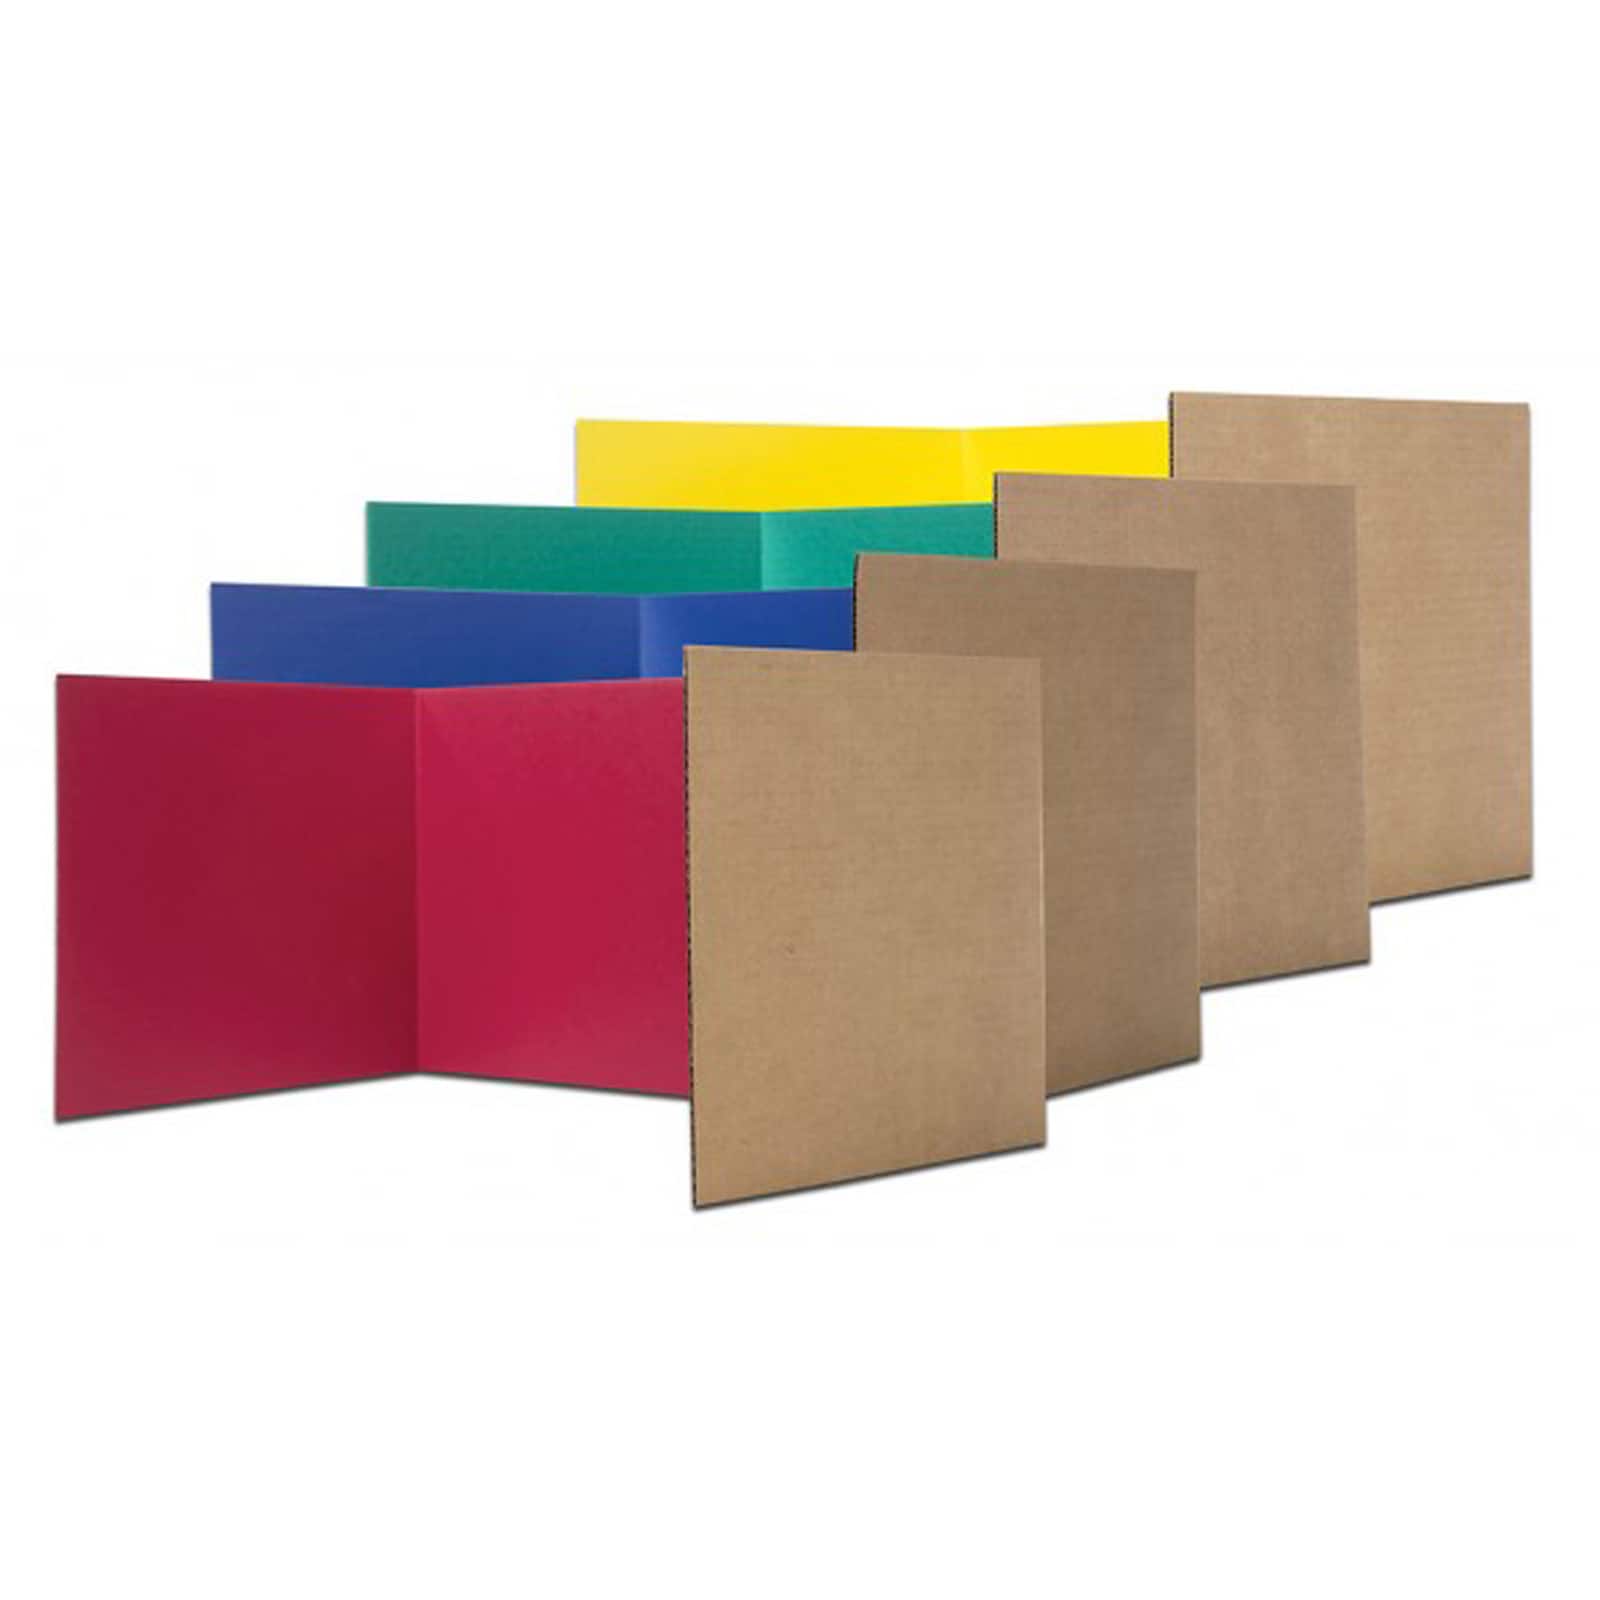 Assorted Colors Corrugated Study Carrel, 24 Pack